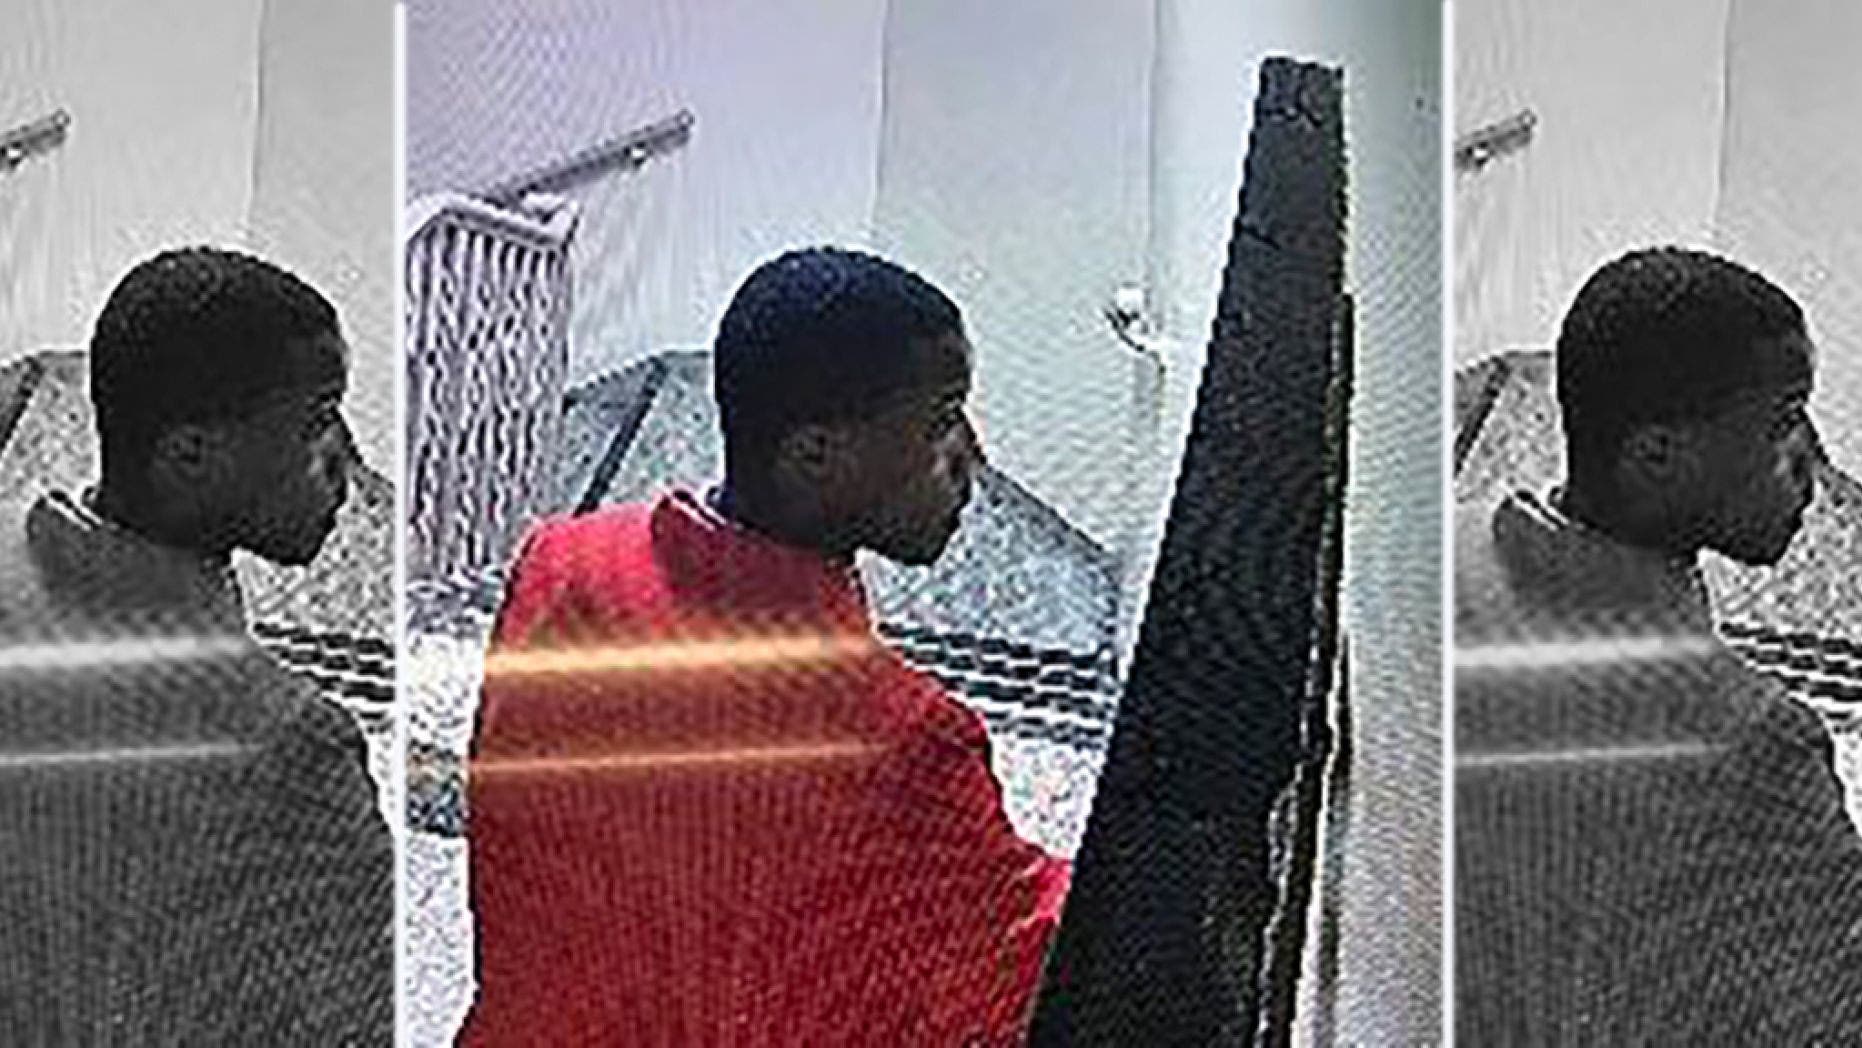 Police said James Polite, 26, was caught on video surveillance vandalizing a Brooklyn synagogue with anti-Semitic graffiti on Thursday. (NYPD)